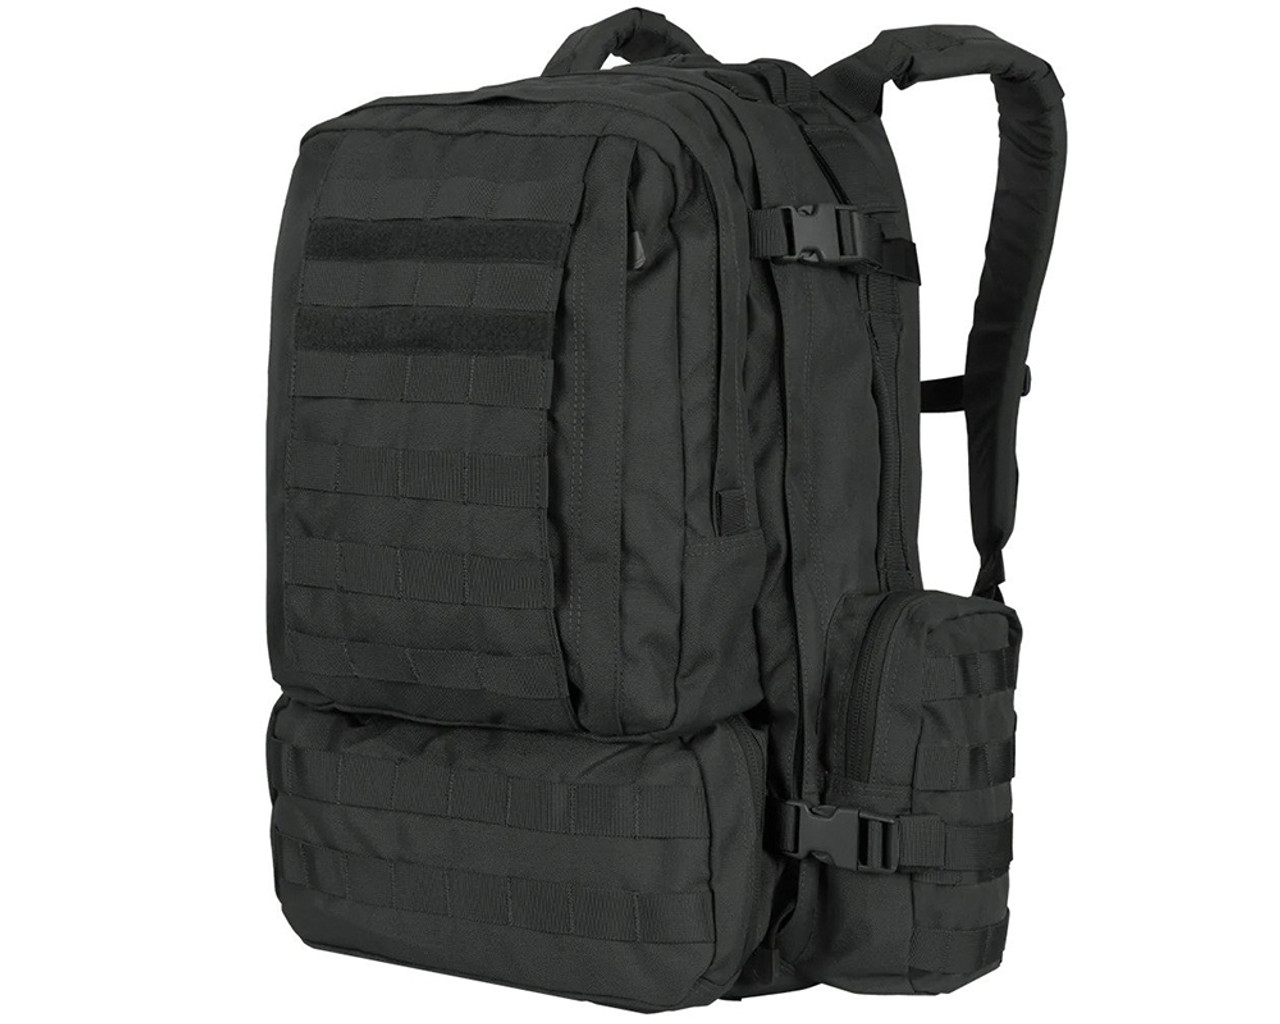 Condor 3-Day Assault Pack Backpack